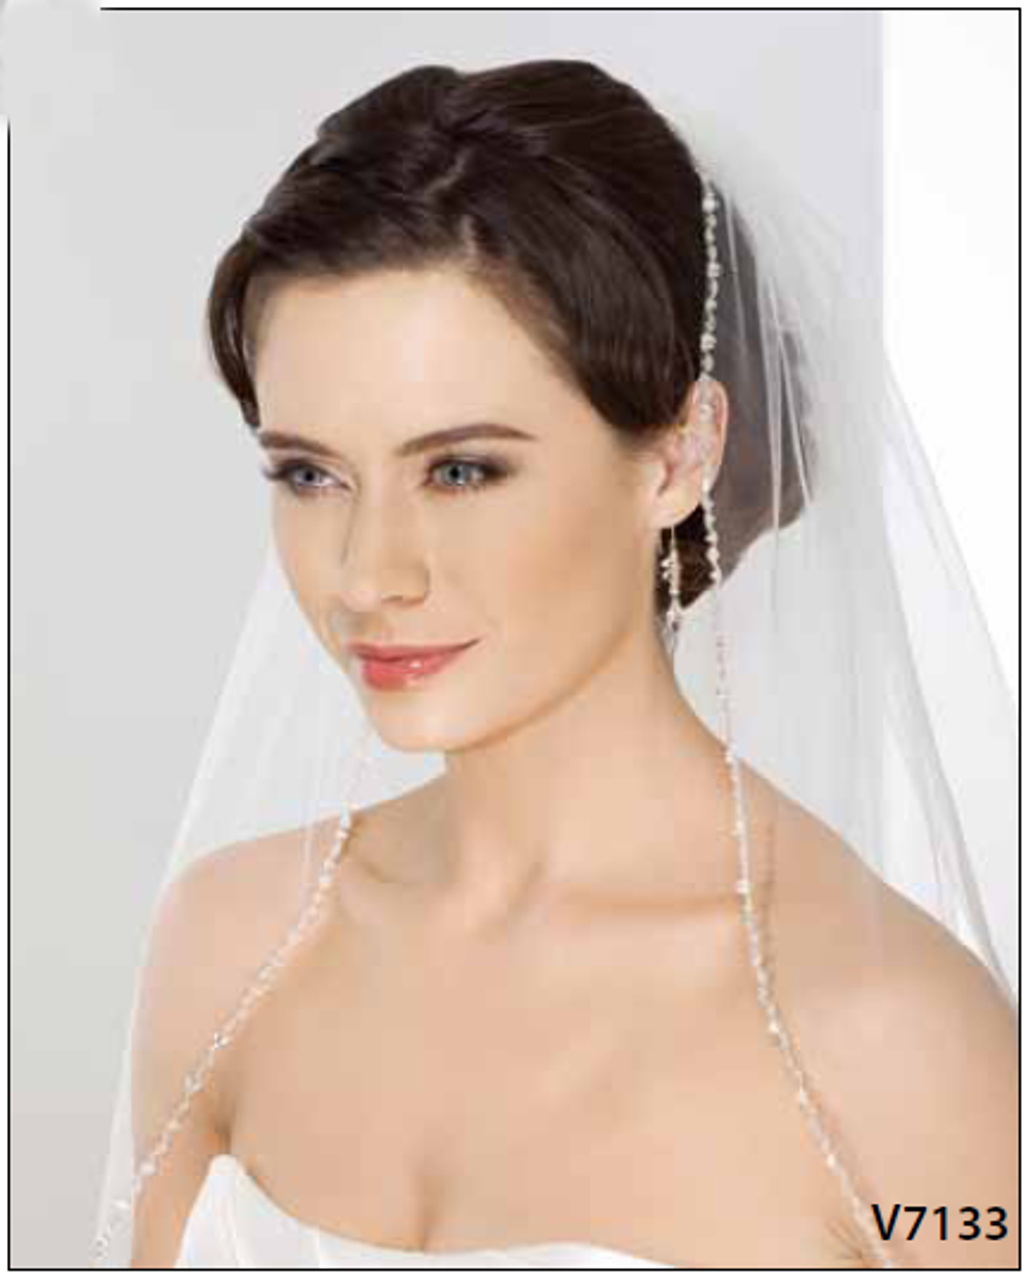 Bel Aire Bridal Veils V7034CX - Cathedral - 22 Rolled Edge w/Alecon Lace  up the sides - 108 inches Long